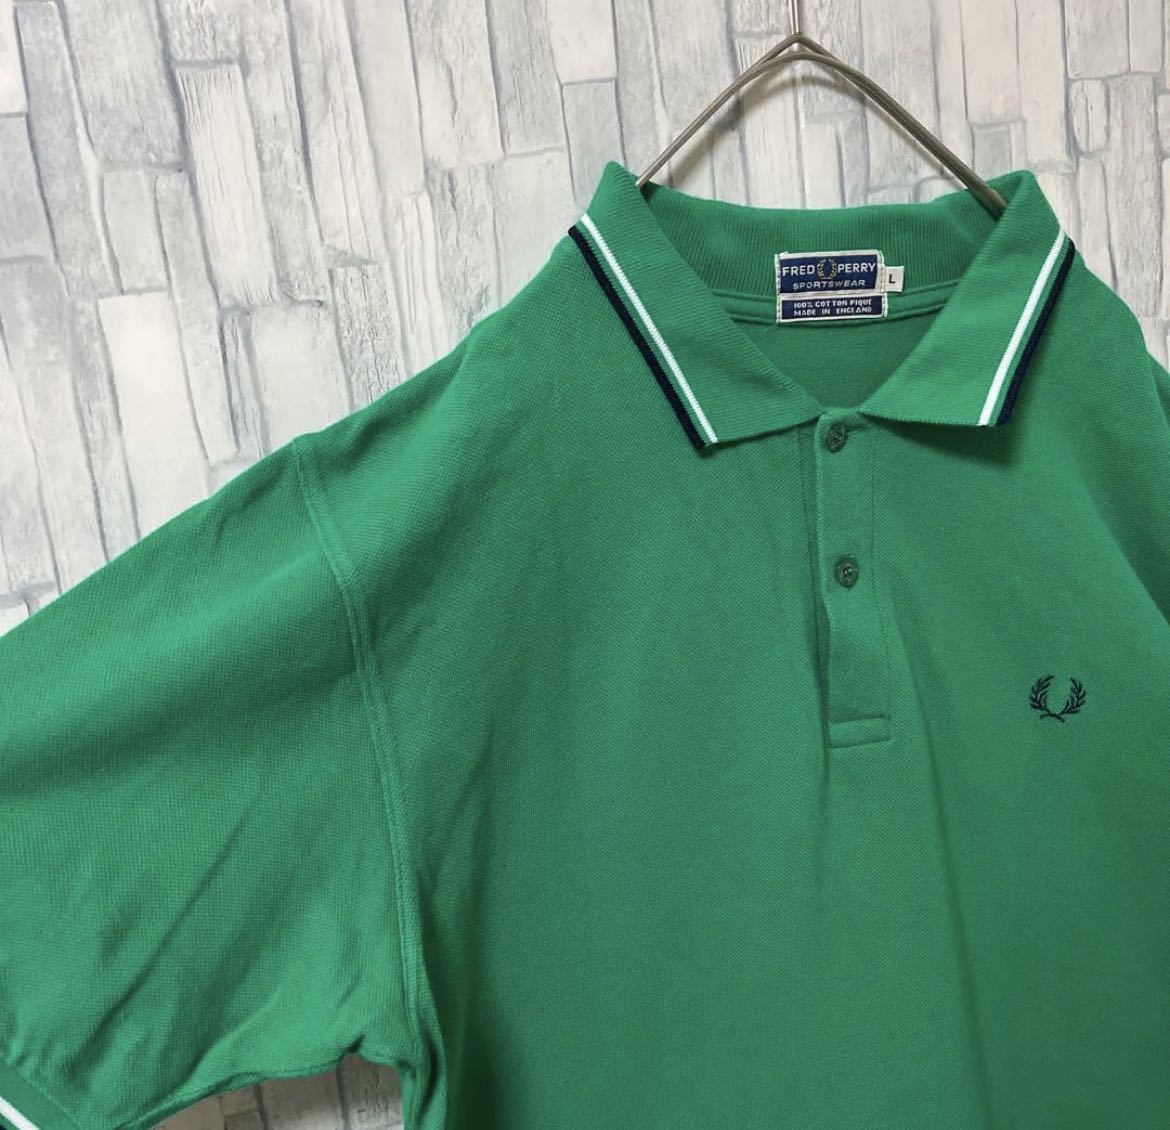 FRED PERRY Fred Perry one Point Logo simple Logo embroidery polo-shirt L short sleeves green England made Britain made deer. . free shipping 